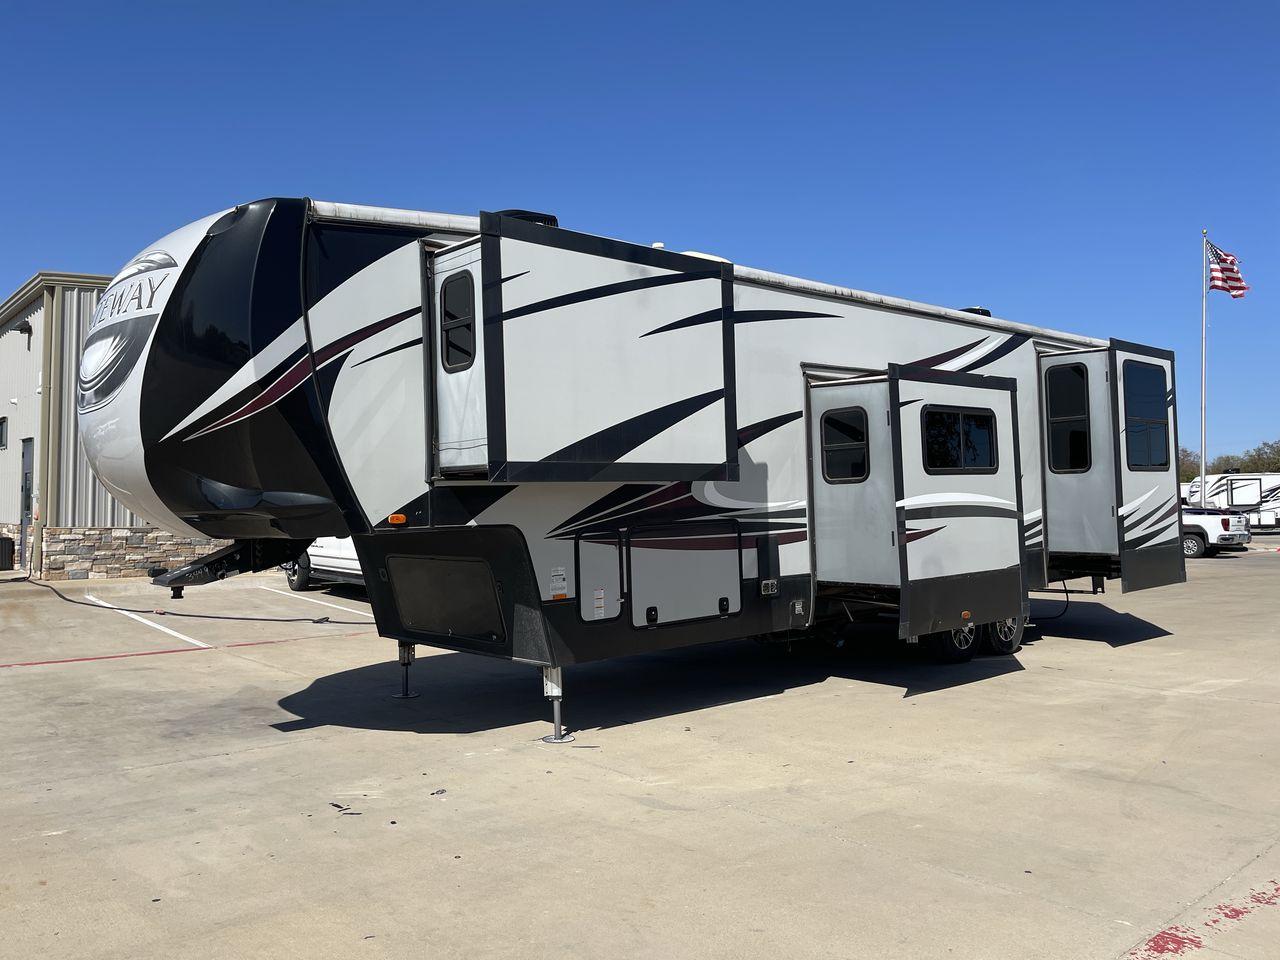 2017 TAN GATEWAY 3712RDMB - (5SFSG4228HE) , Length: 39.5 ft. | Dry Weight: 13,680 lbs. | Gross Weight: 15,500 lbs. | Slides: 4 transmission, located at 4319 N Main Street, Cleburne, TX, 76033, (817) 221-0660, 32.435829, -97.384178 - The 2017 Gateway 3712RDMB Fifth Wheel provides luxurious travel experiences. With a length of 39.5 feet and a dry weight of 13,680 pounds, this amazing RV provides large living accommodations and all of the conveniences you require for a comfortable travel. With a gross weight of 15,500 pounds and f - Photo #23